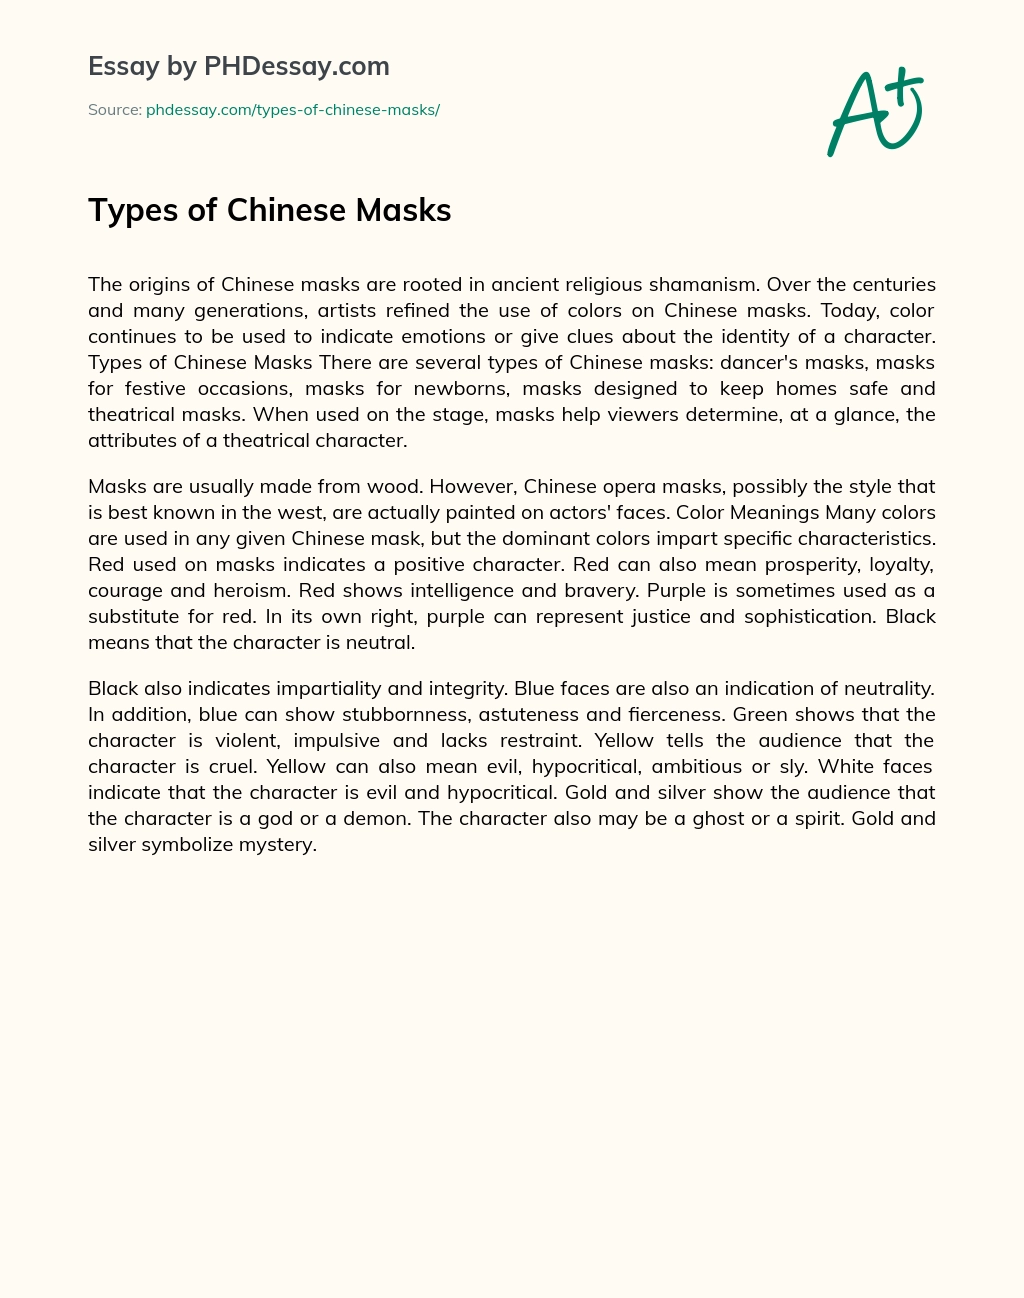 Types of Chinese Masks essay